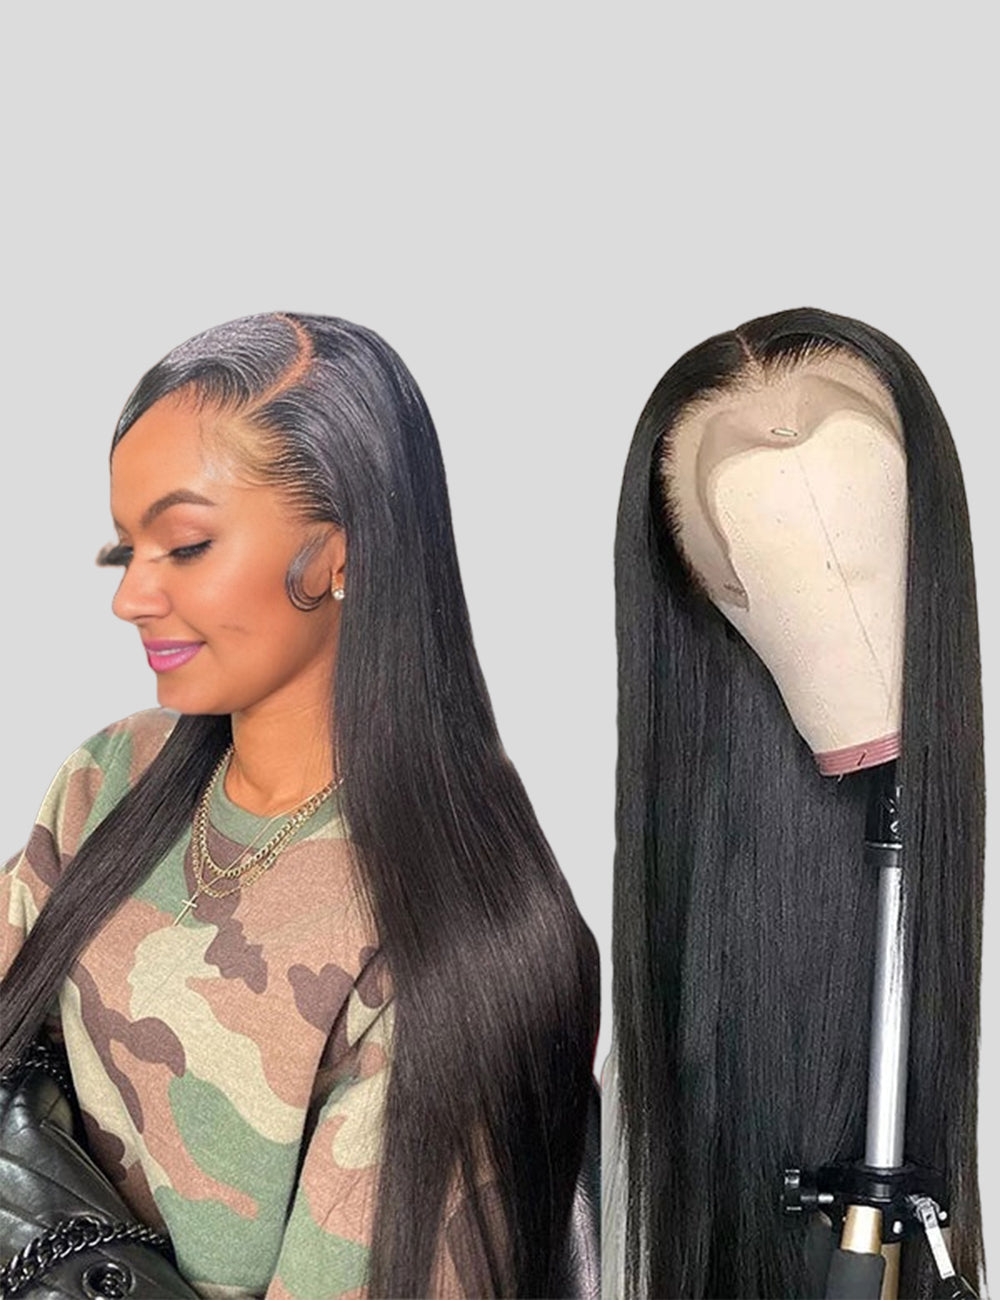 Flash Sale Straight Human Hair Wigs 13x4 &amp;13x6 HD Lace Front Wigs